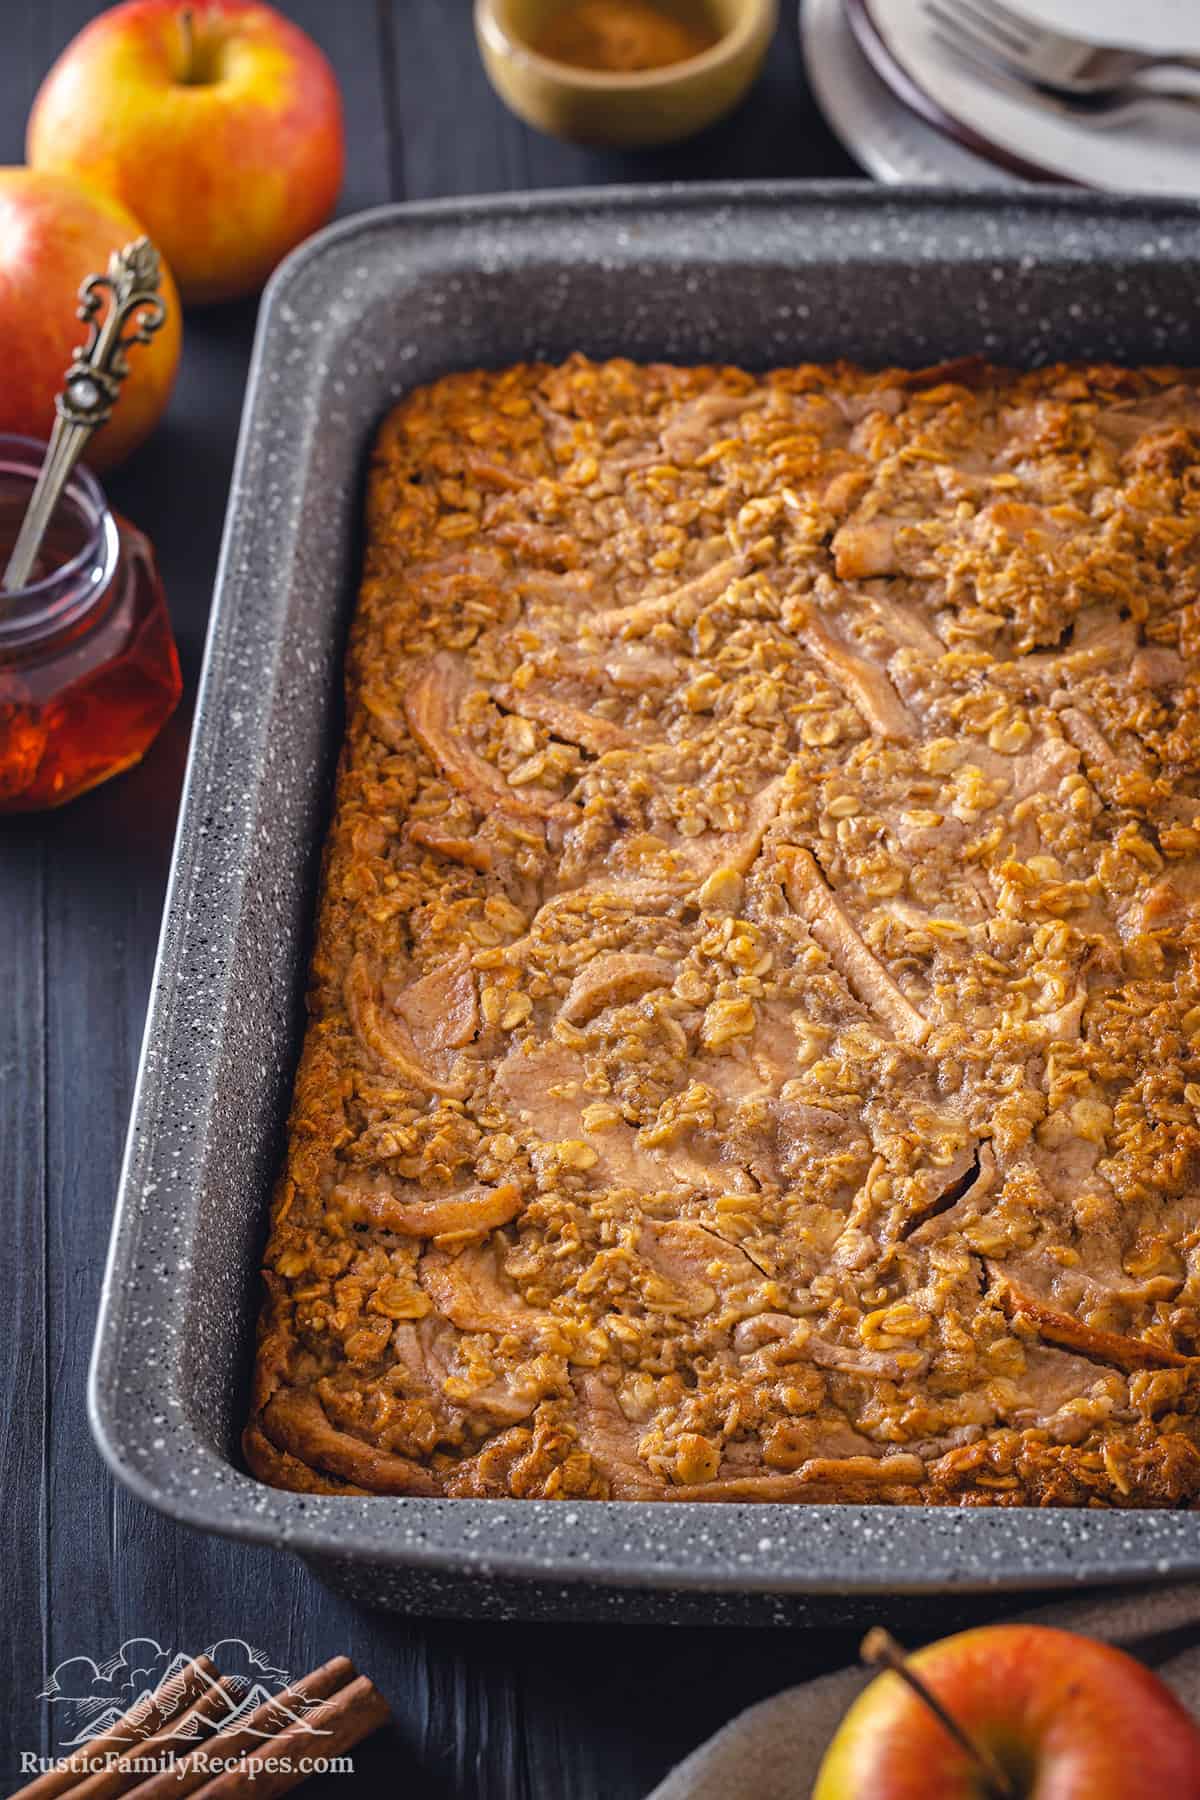 Baking dish with apple baked oatmeal